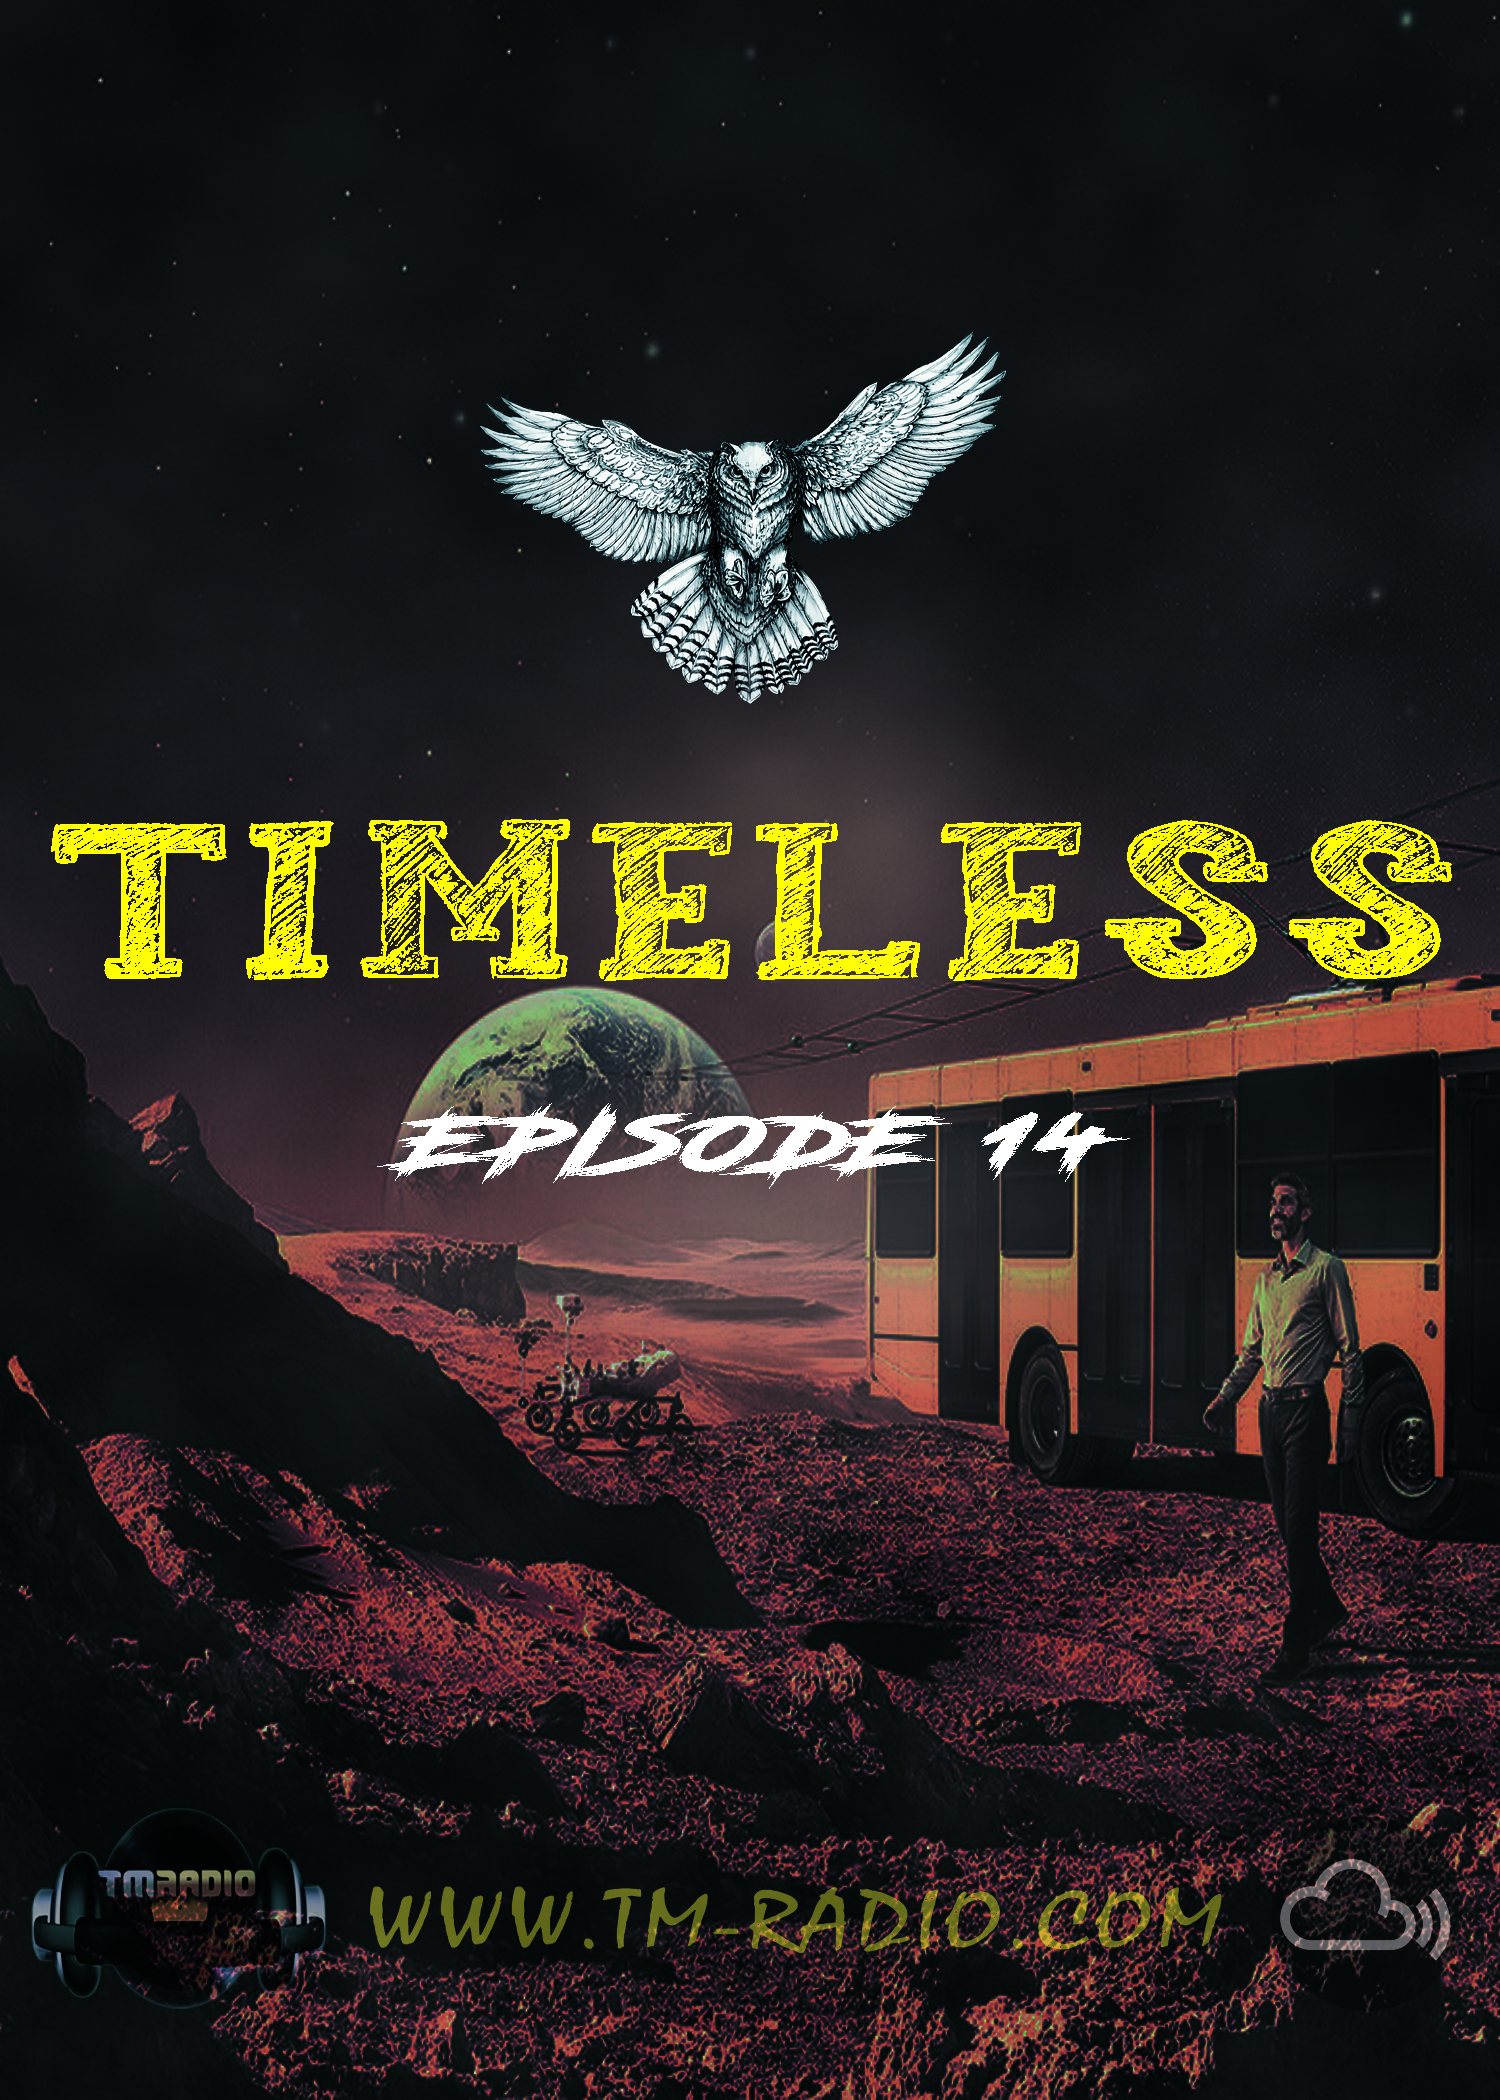 Timeless :: Cris Rosales - Timeless Radioshow Ep. 14 - 04-01-2021 (aired on January 4th) banner logo